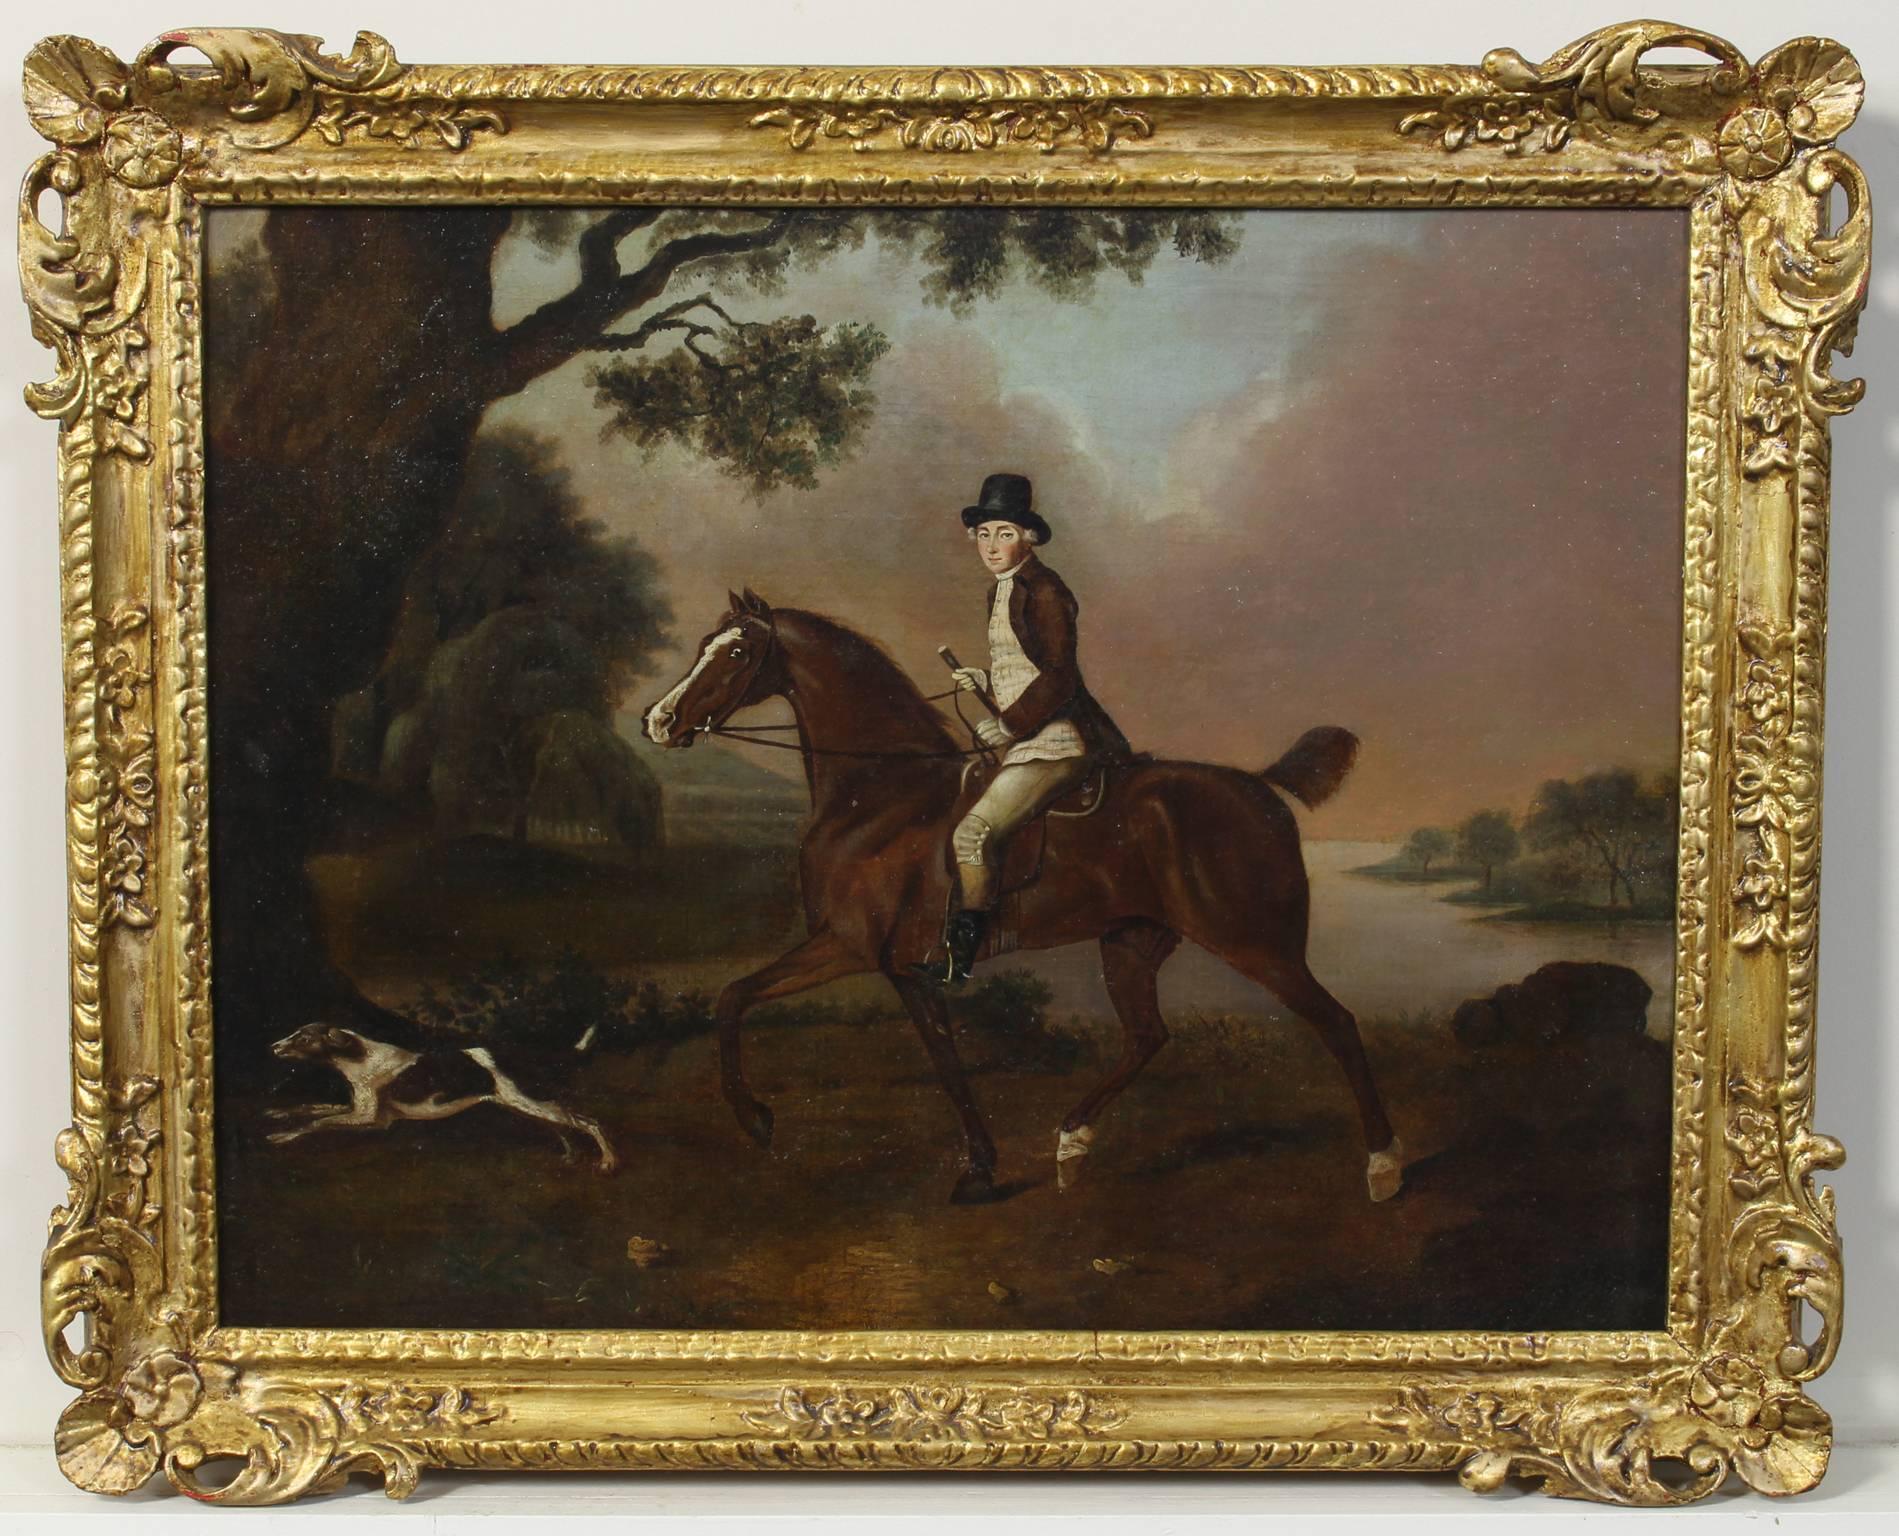 A charming late 18th century oil on canvas painting depicting a horse and rider in a landscape. The rider in brown coat, striped waistcoat and beaver hat astride a chestnut mare.